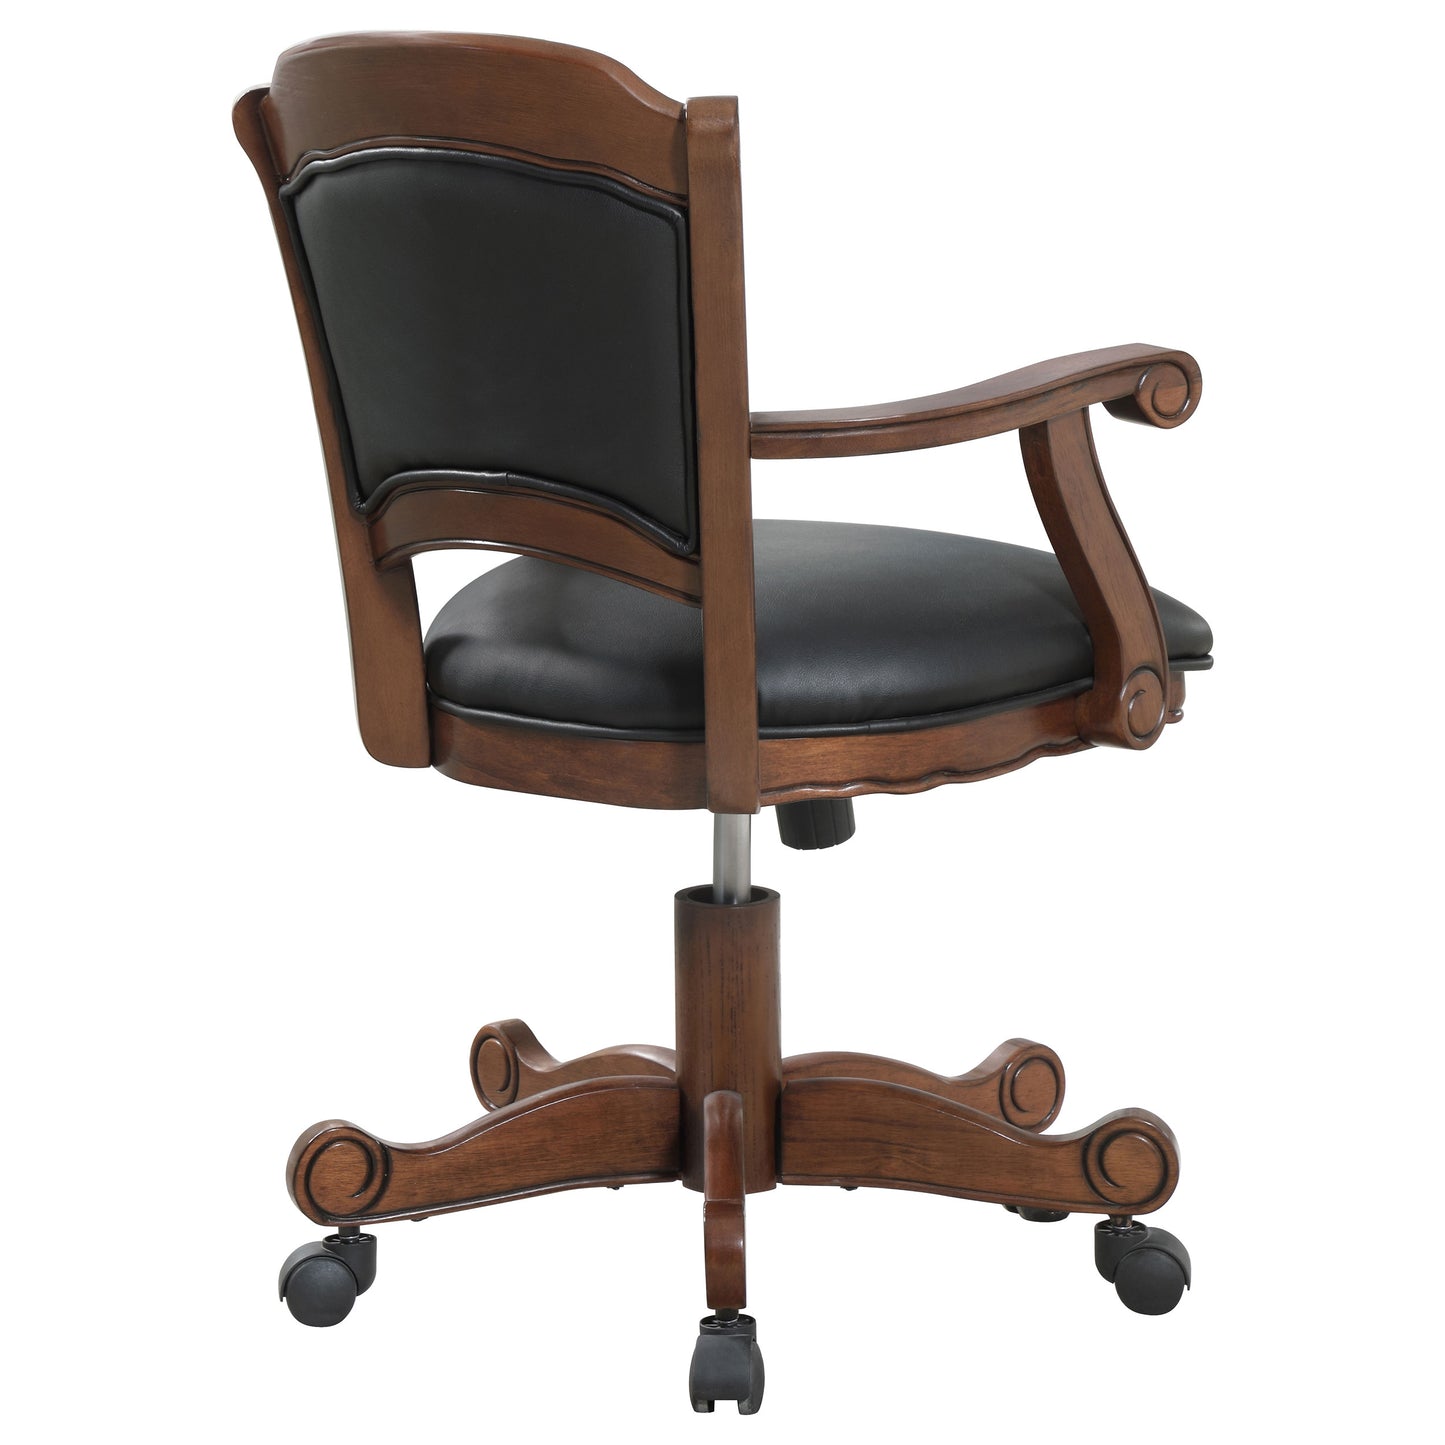 Turk Game Chair with Casters Black and Tobacco